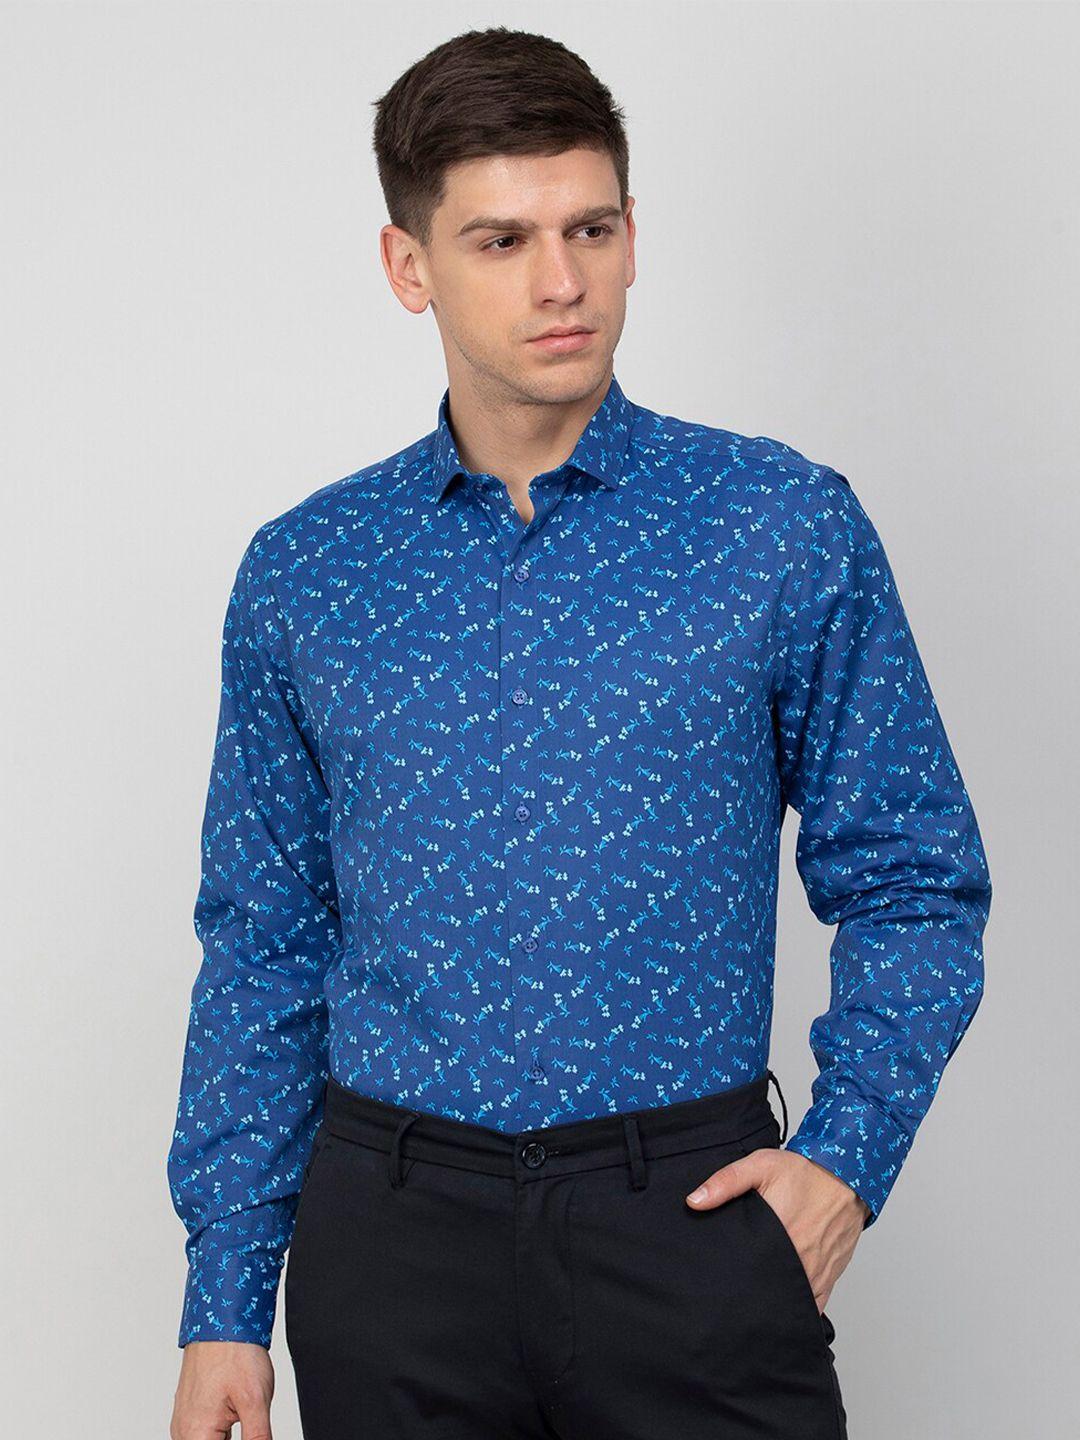 code-by-lifestyle-floral-printed-cotton-regular-fit-long-sleeves-formal-shirt